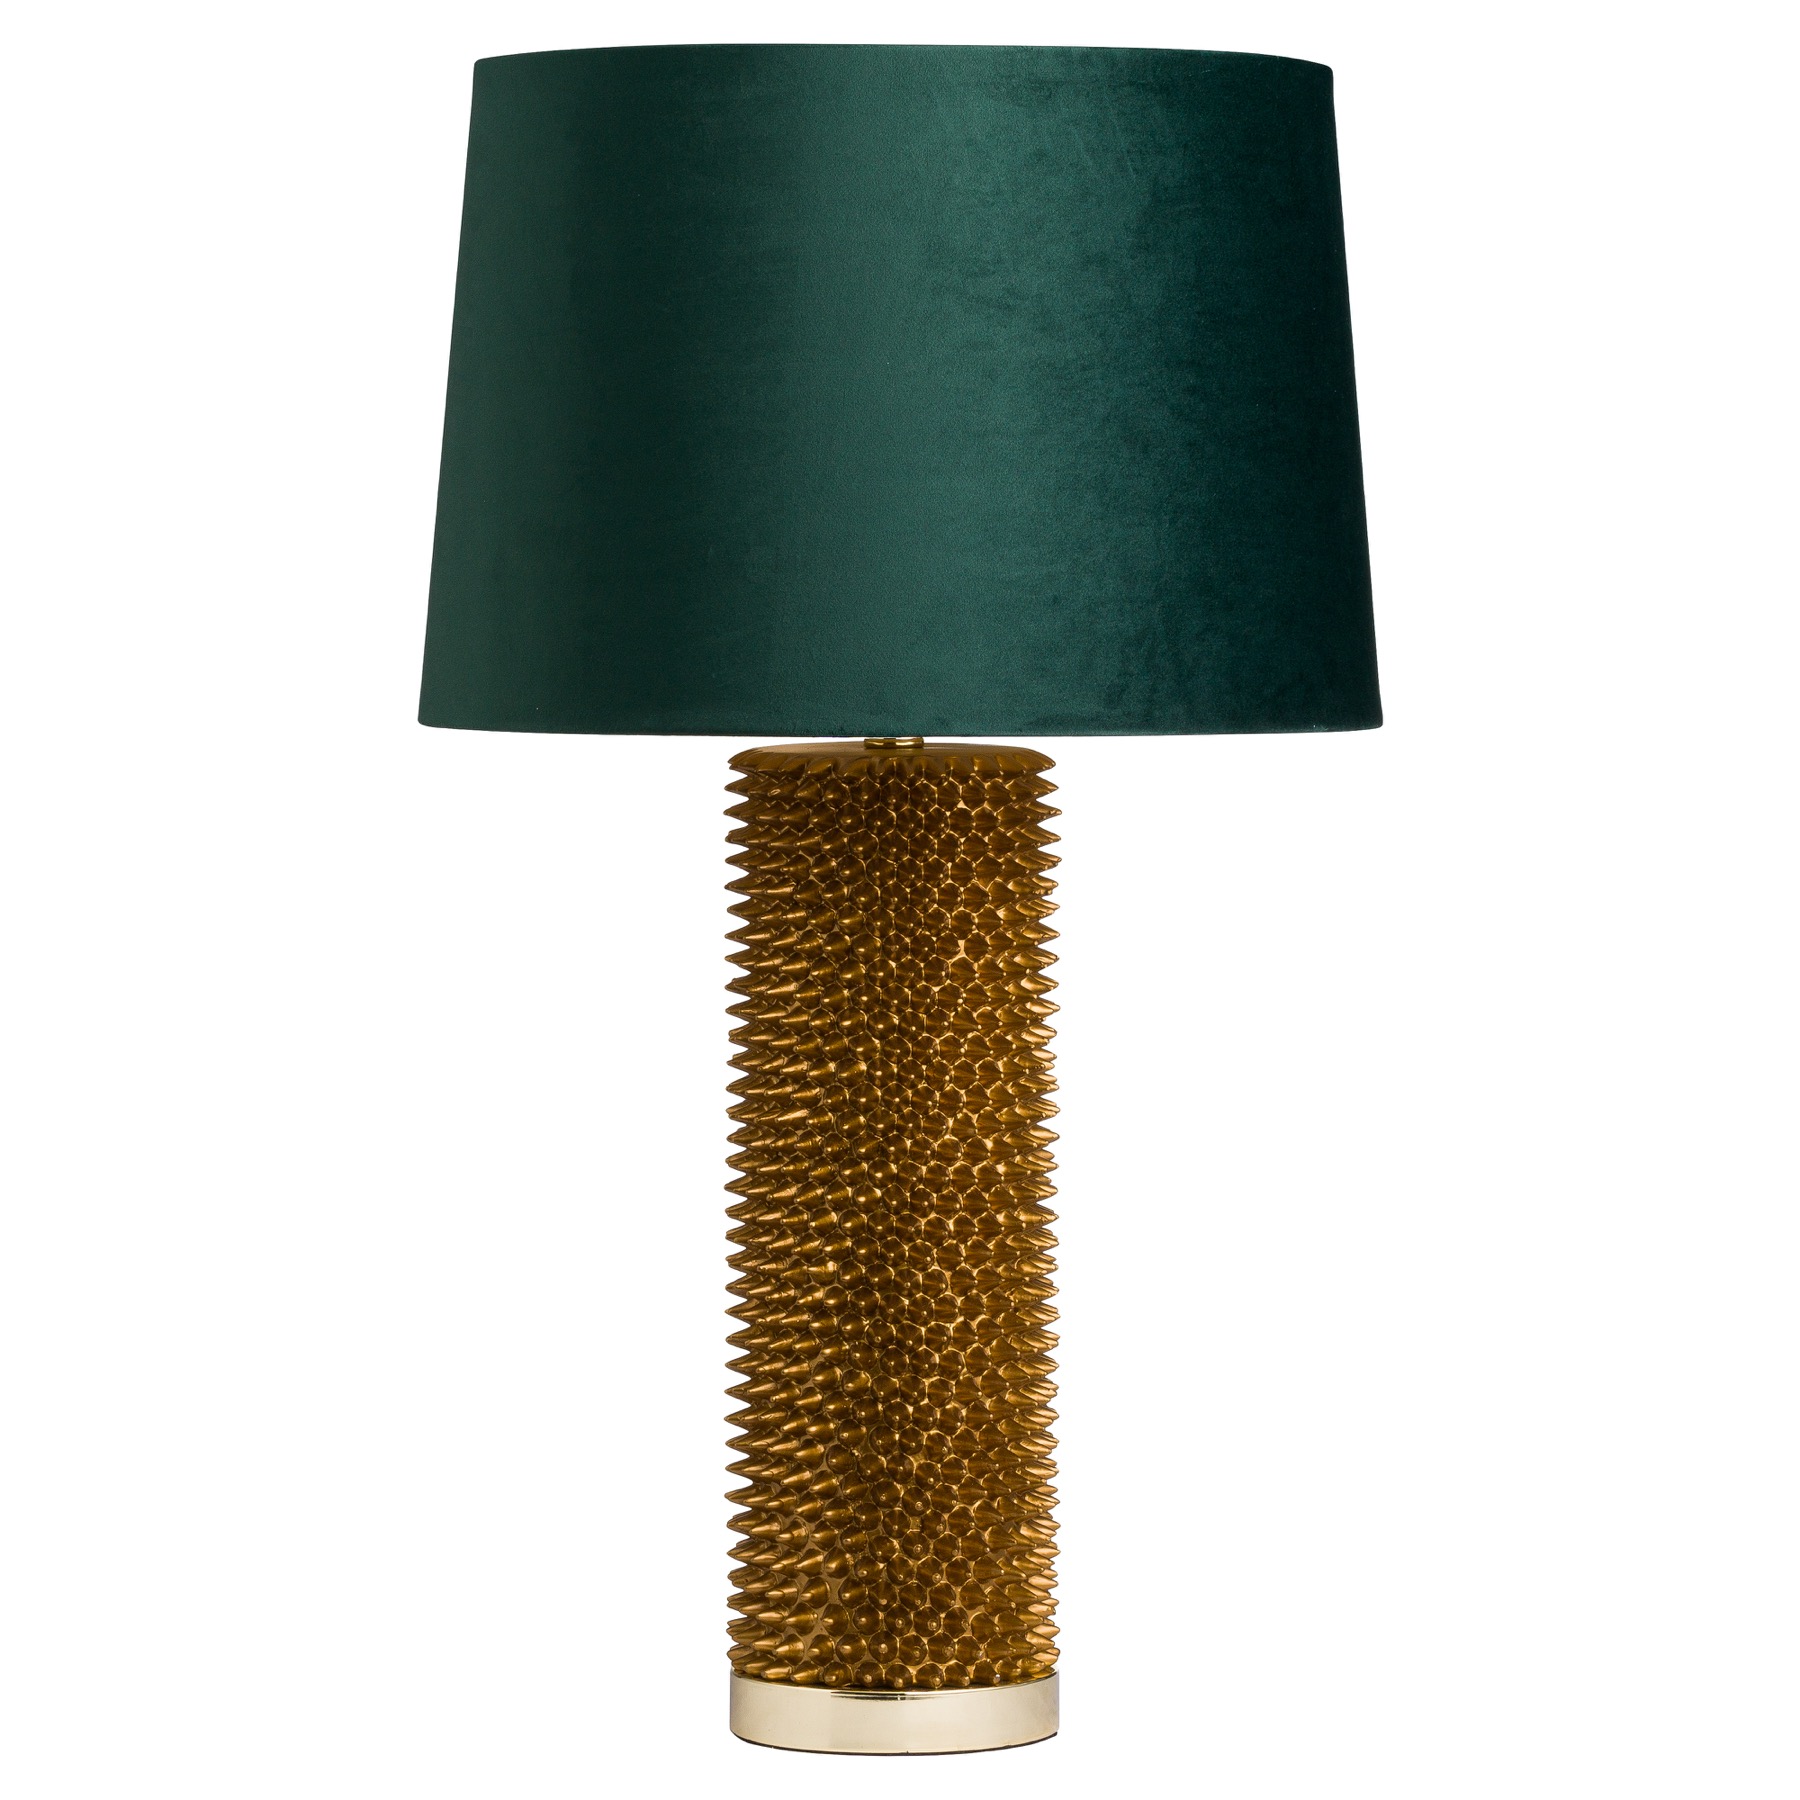 Antique Gold Acantho Table Lamp With Emerald Velvet Shade